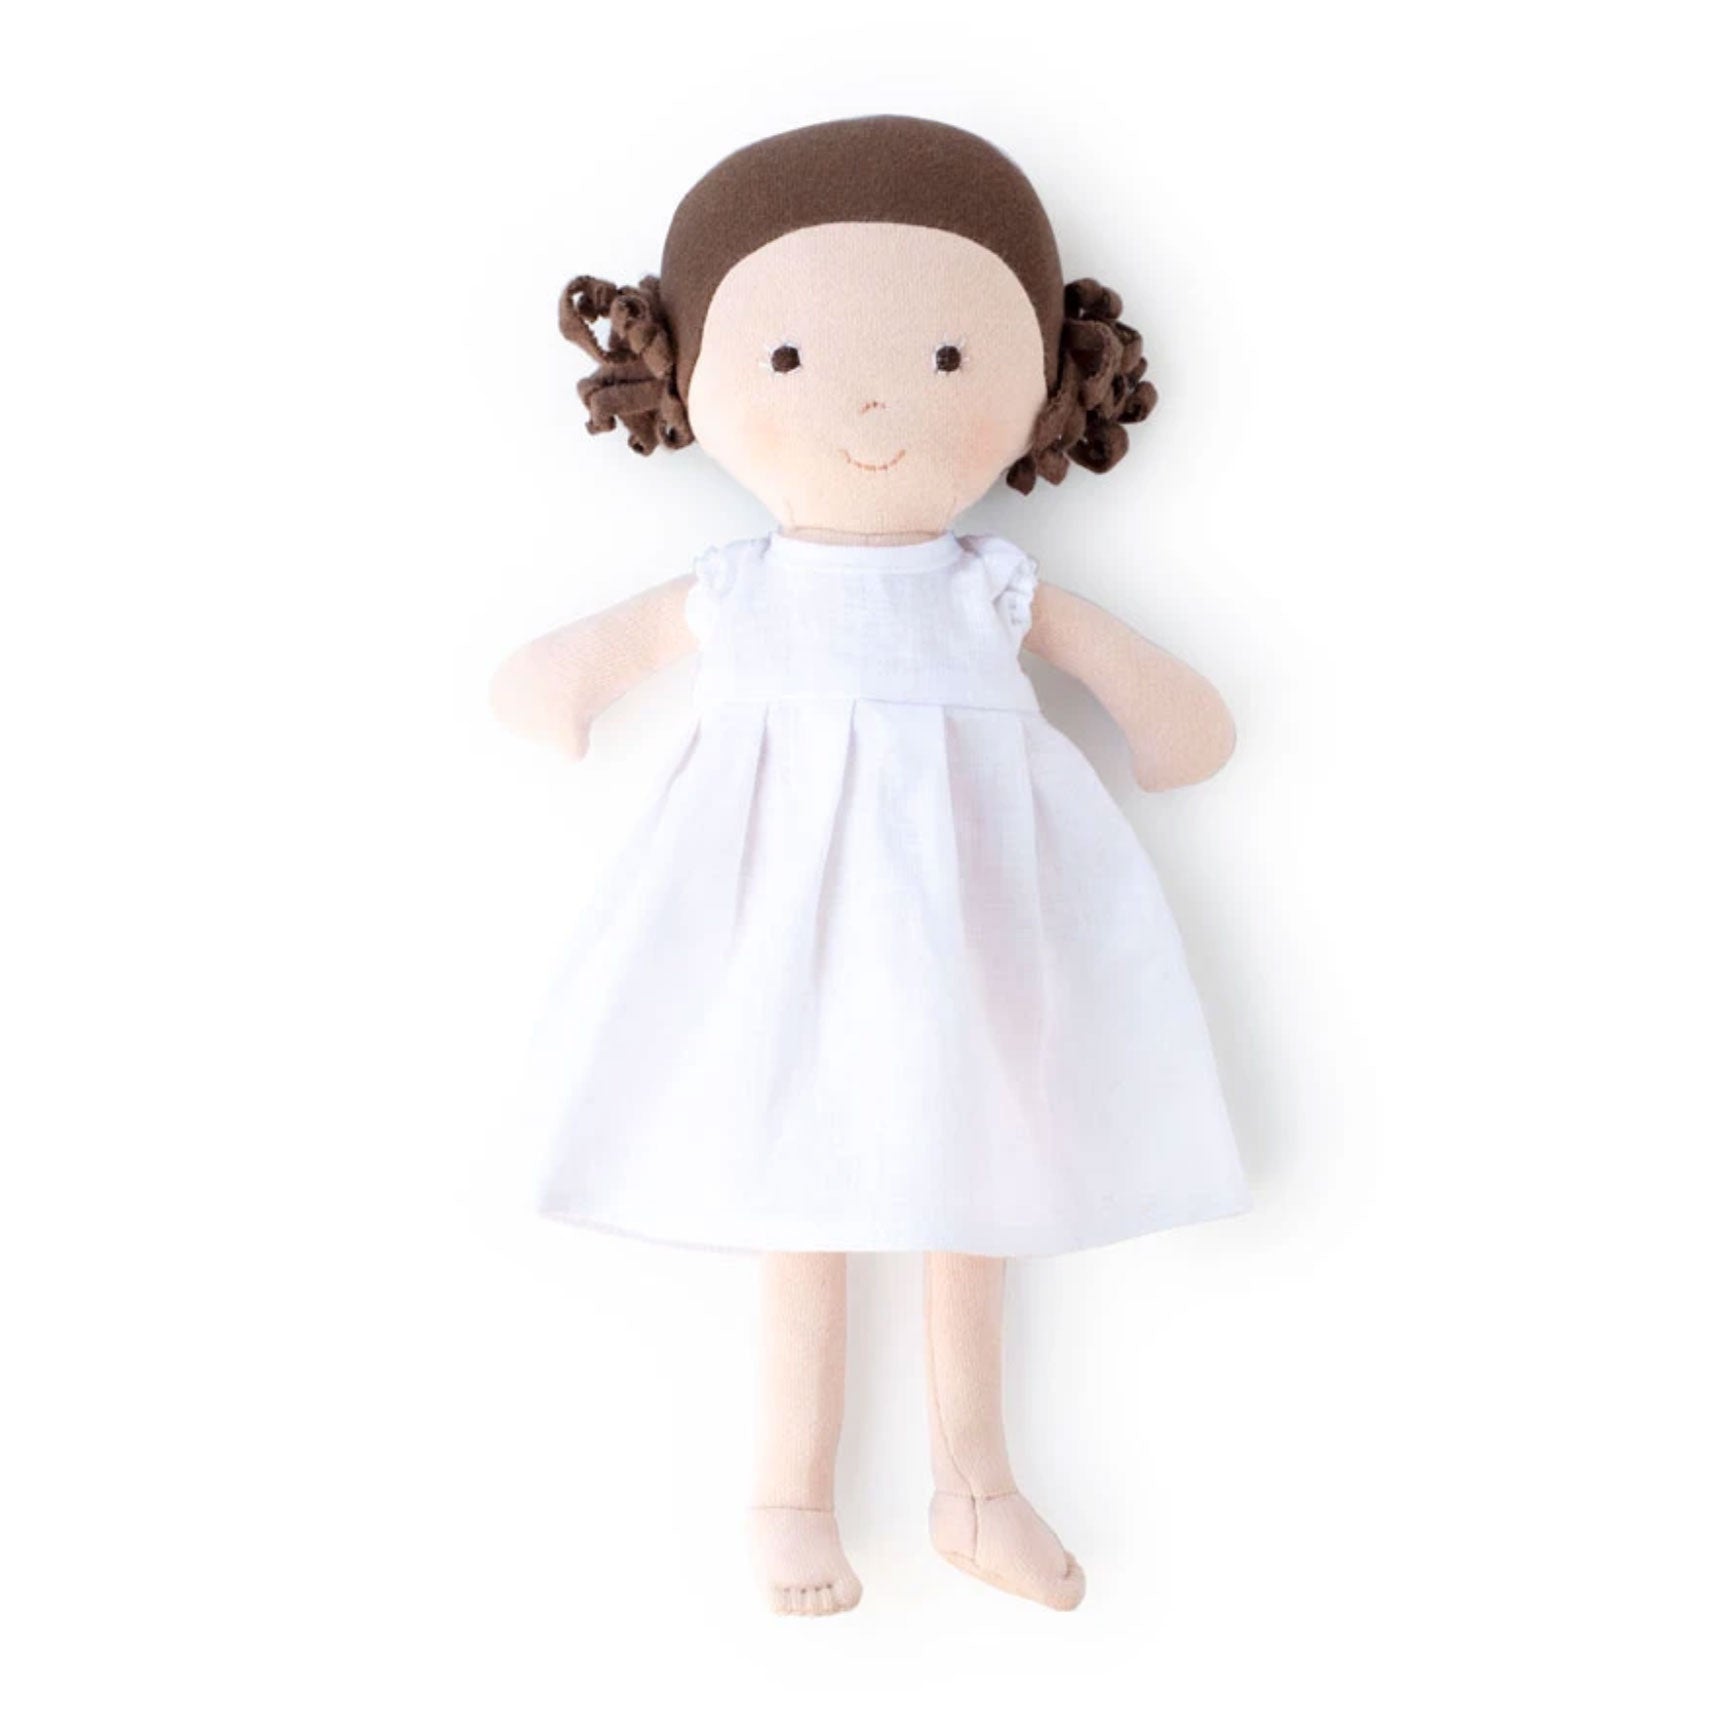 Hazel Village Louise soft doll at Bonjour Baby Baskets, luxury baby gifts